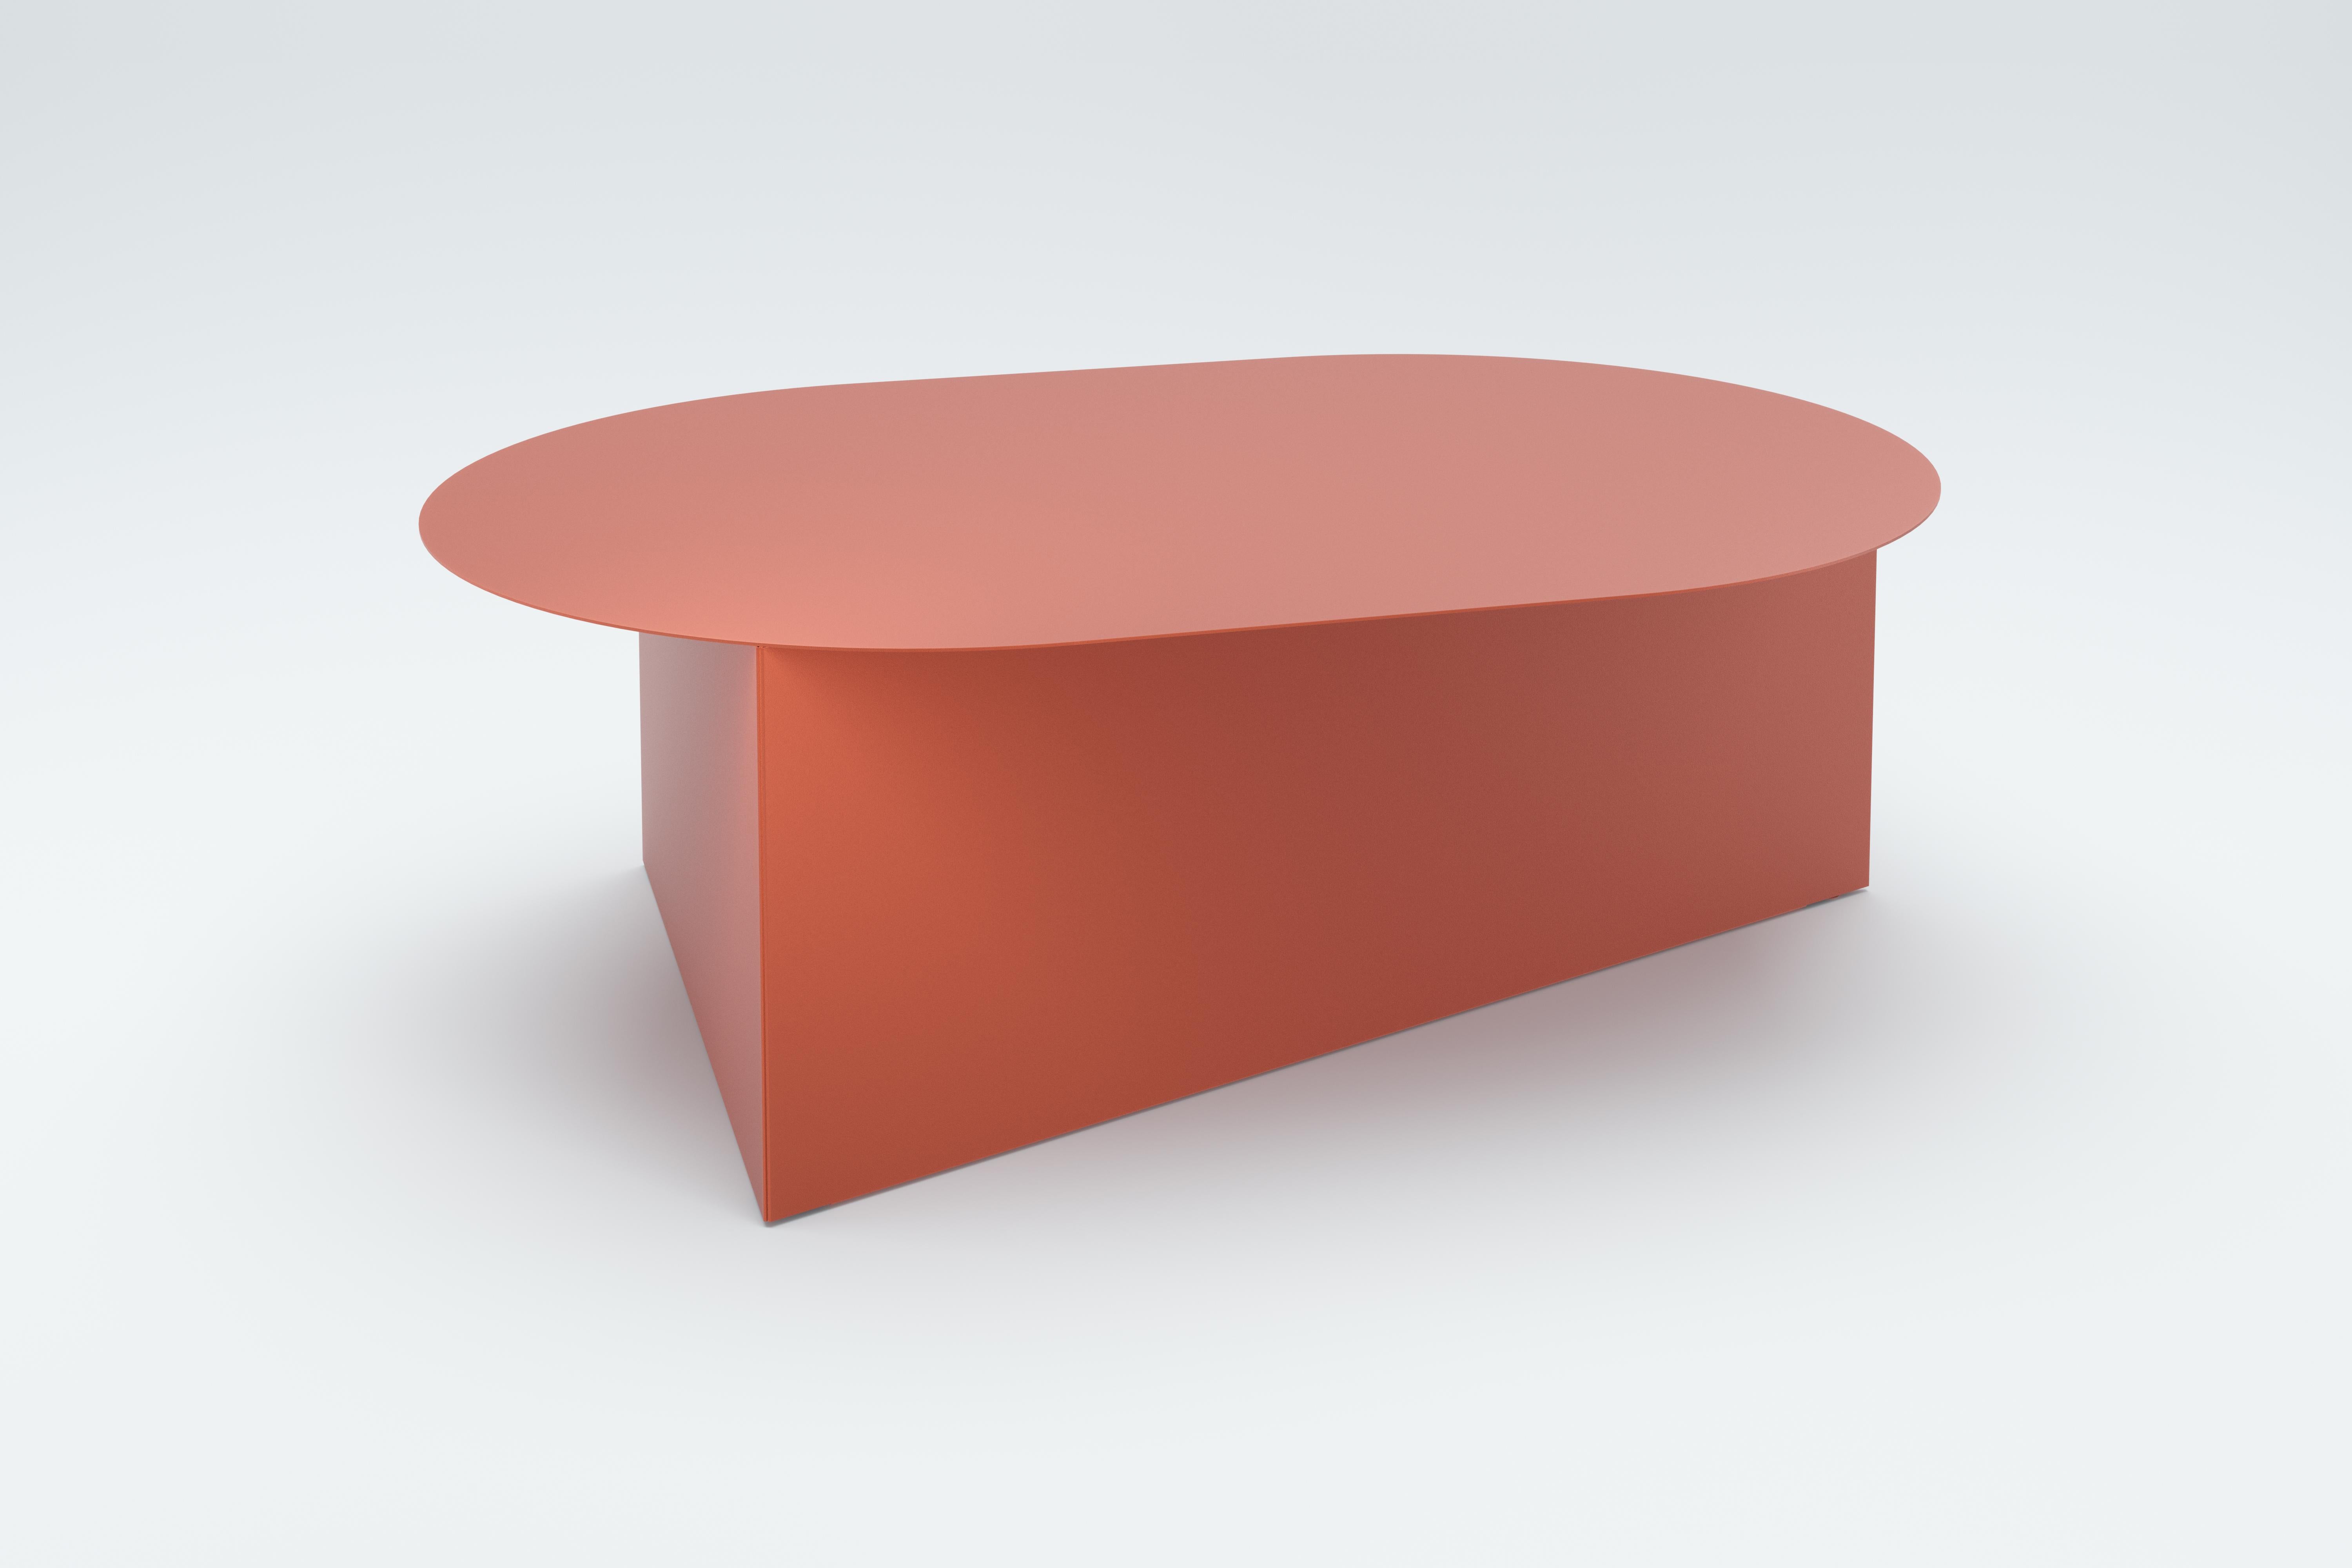 Steel oblong prisma 105 coffe table by Sebastian Scherer
Dimensions: D 105 x W 70x H 35 cm
Materials: steel.
Weight: 19.6 kg.
Also available: steel (matt): snow white / light sand / sun yellow / clay orange / rust red / navy blue / graphite grey